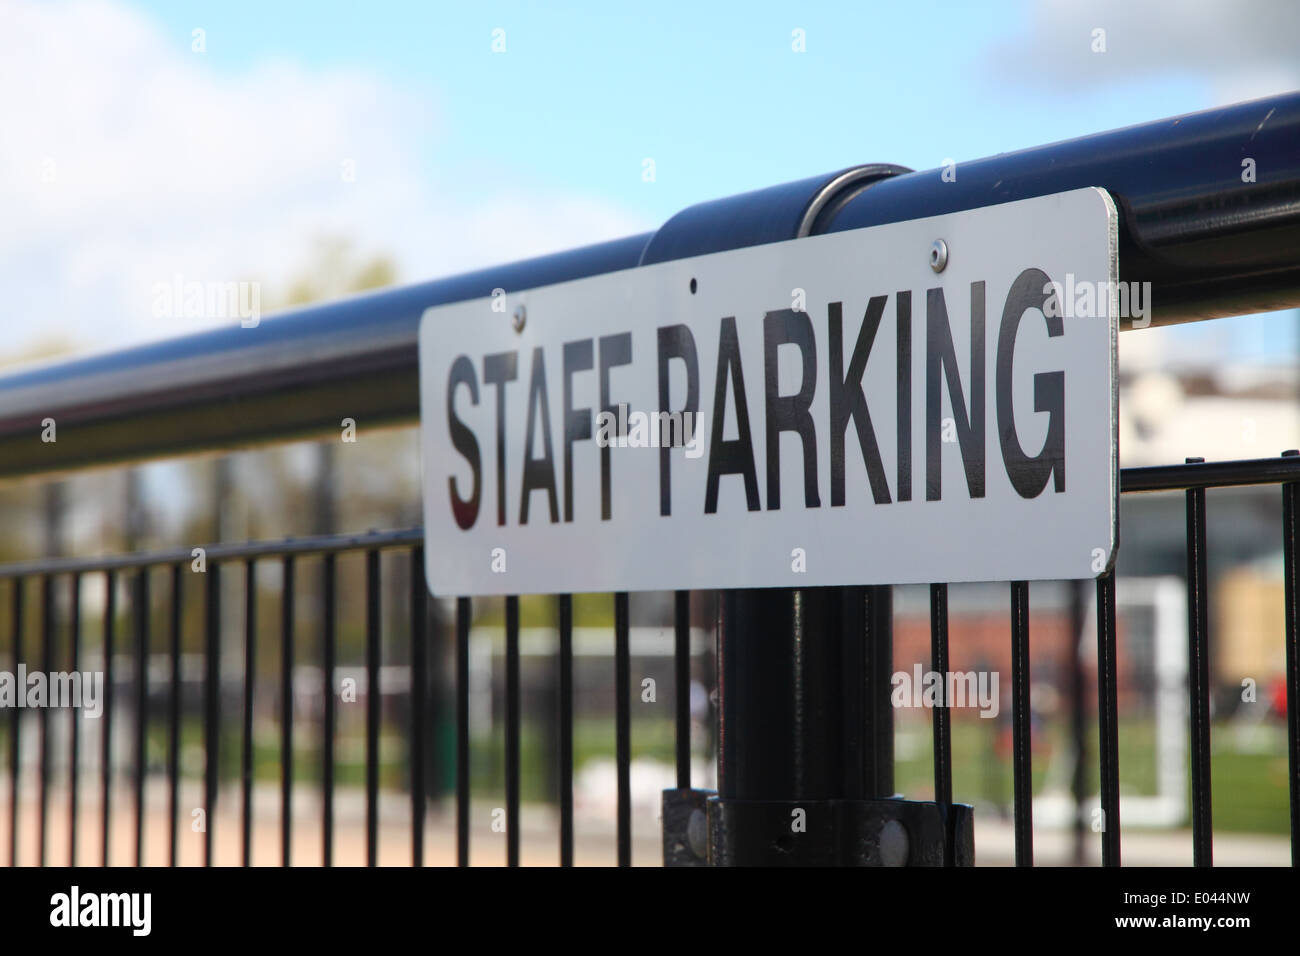 'Staff Parking' sign in car park Stock Photo